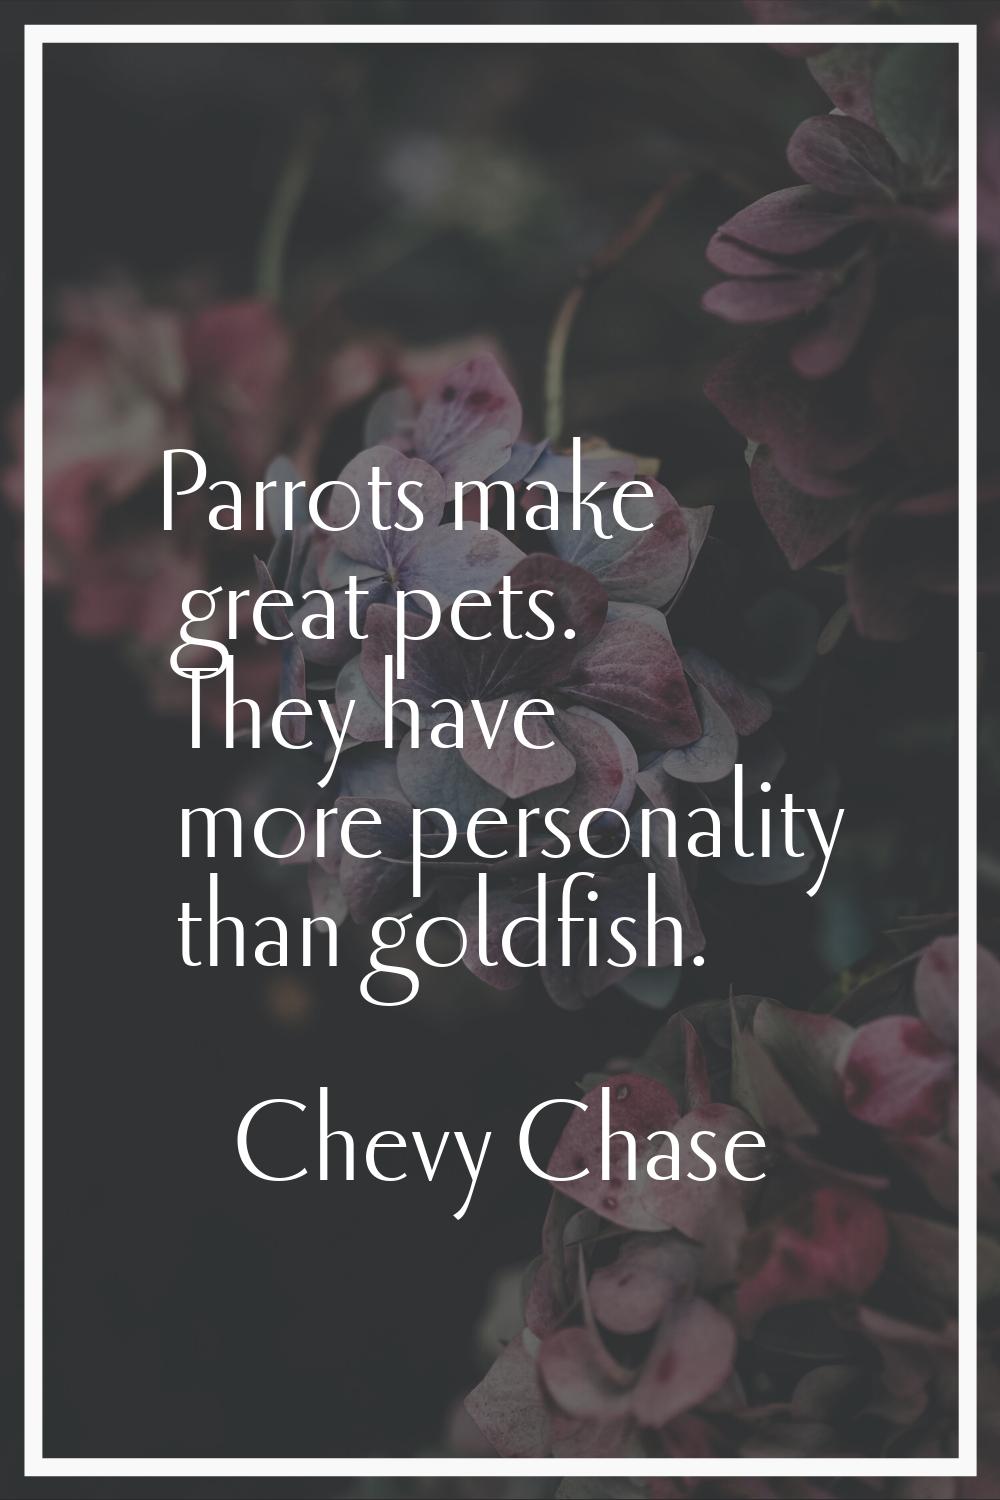 Parrots make great pets. They have more personality than goldfish.